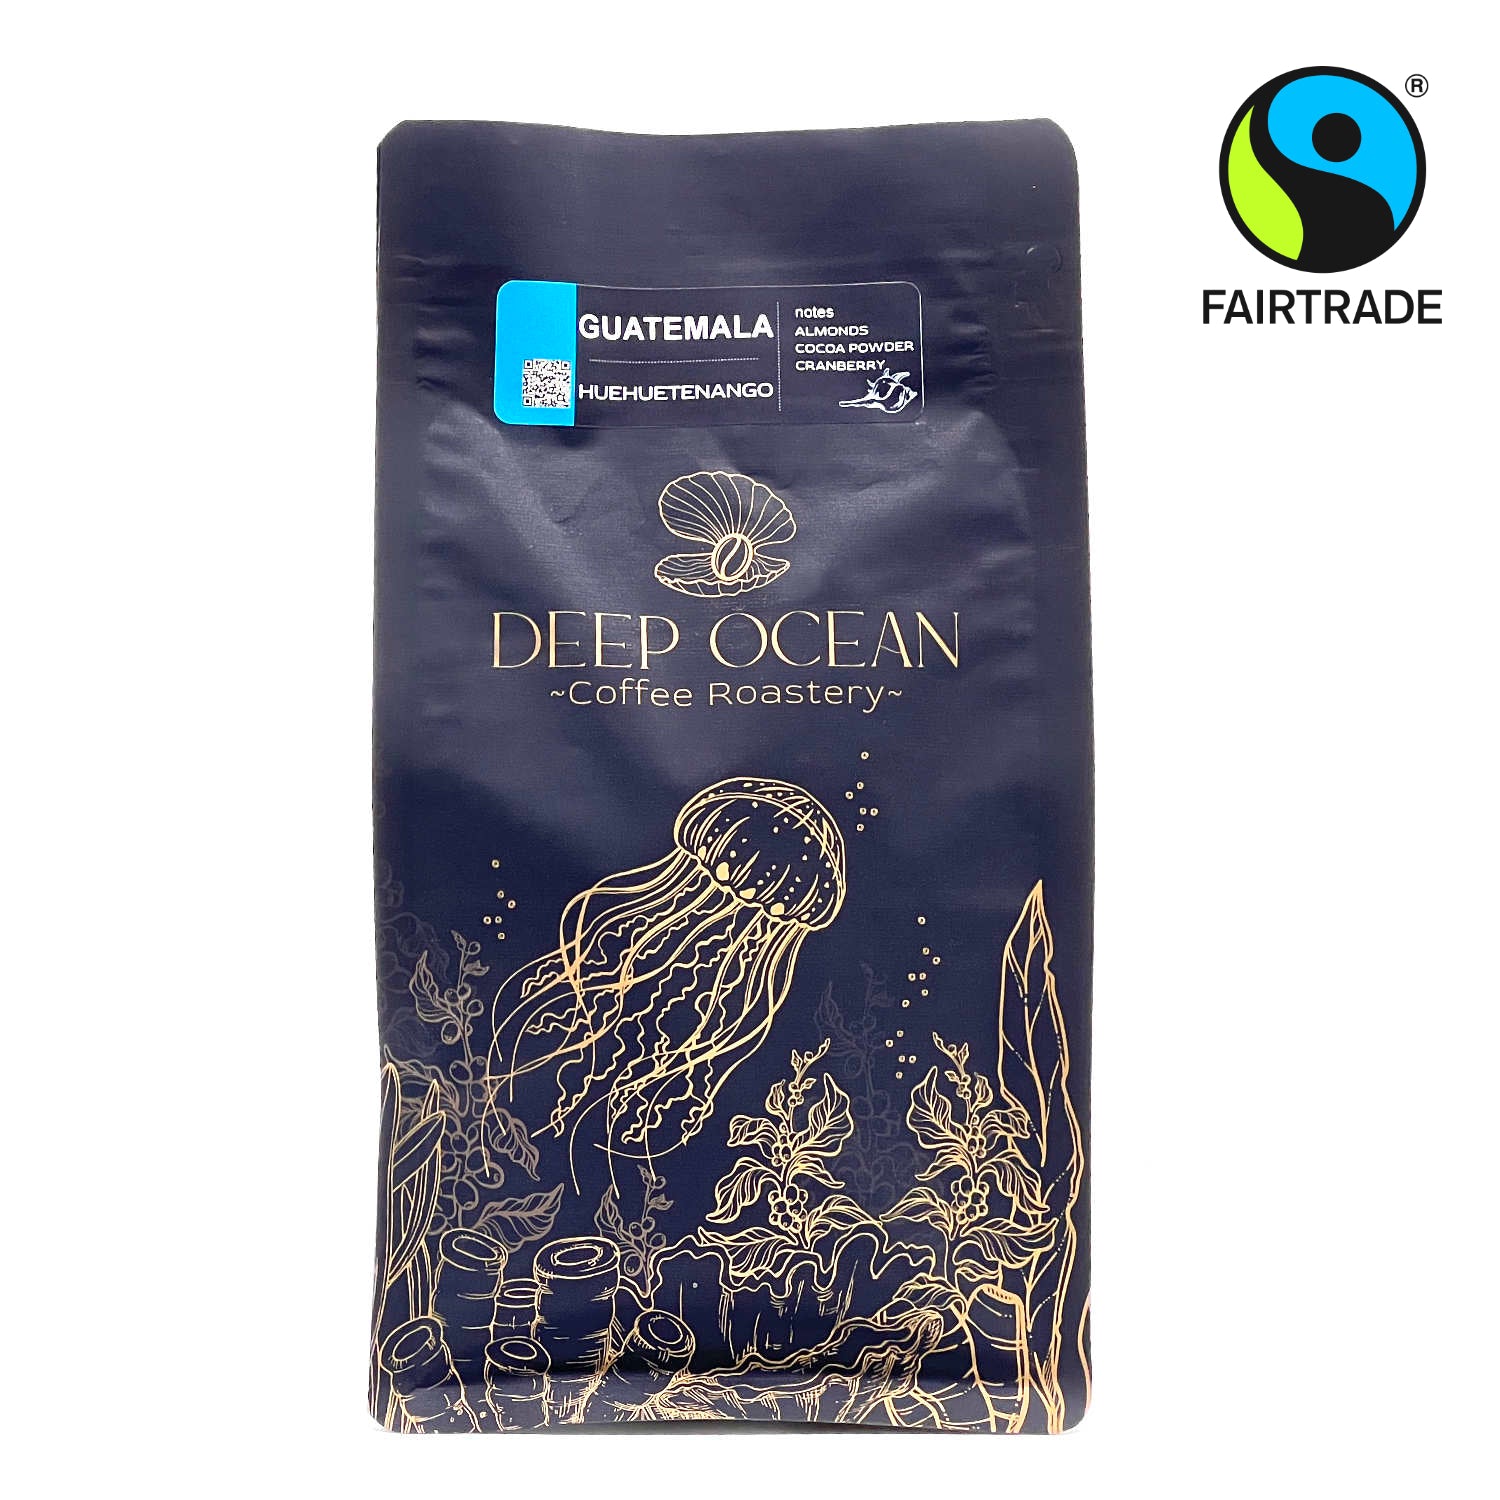 variant 1 - medium roasted coffee Guatemala is great choice of specialty coffee.